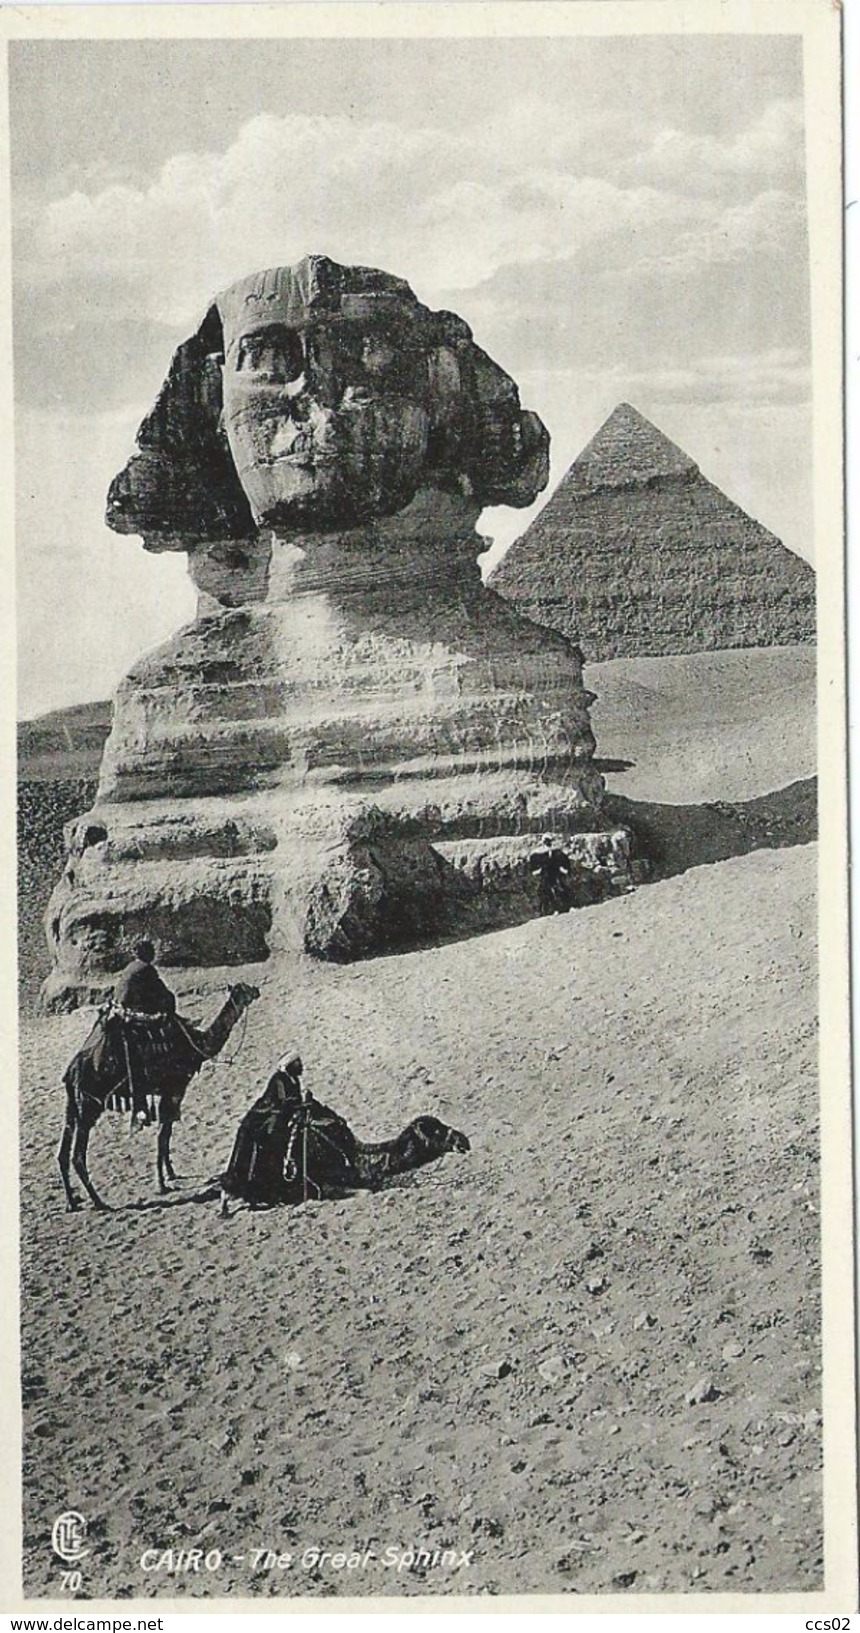 Cairo Le Caire The Great Sphinx - Le Caire